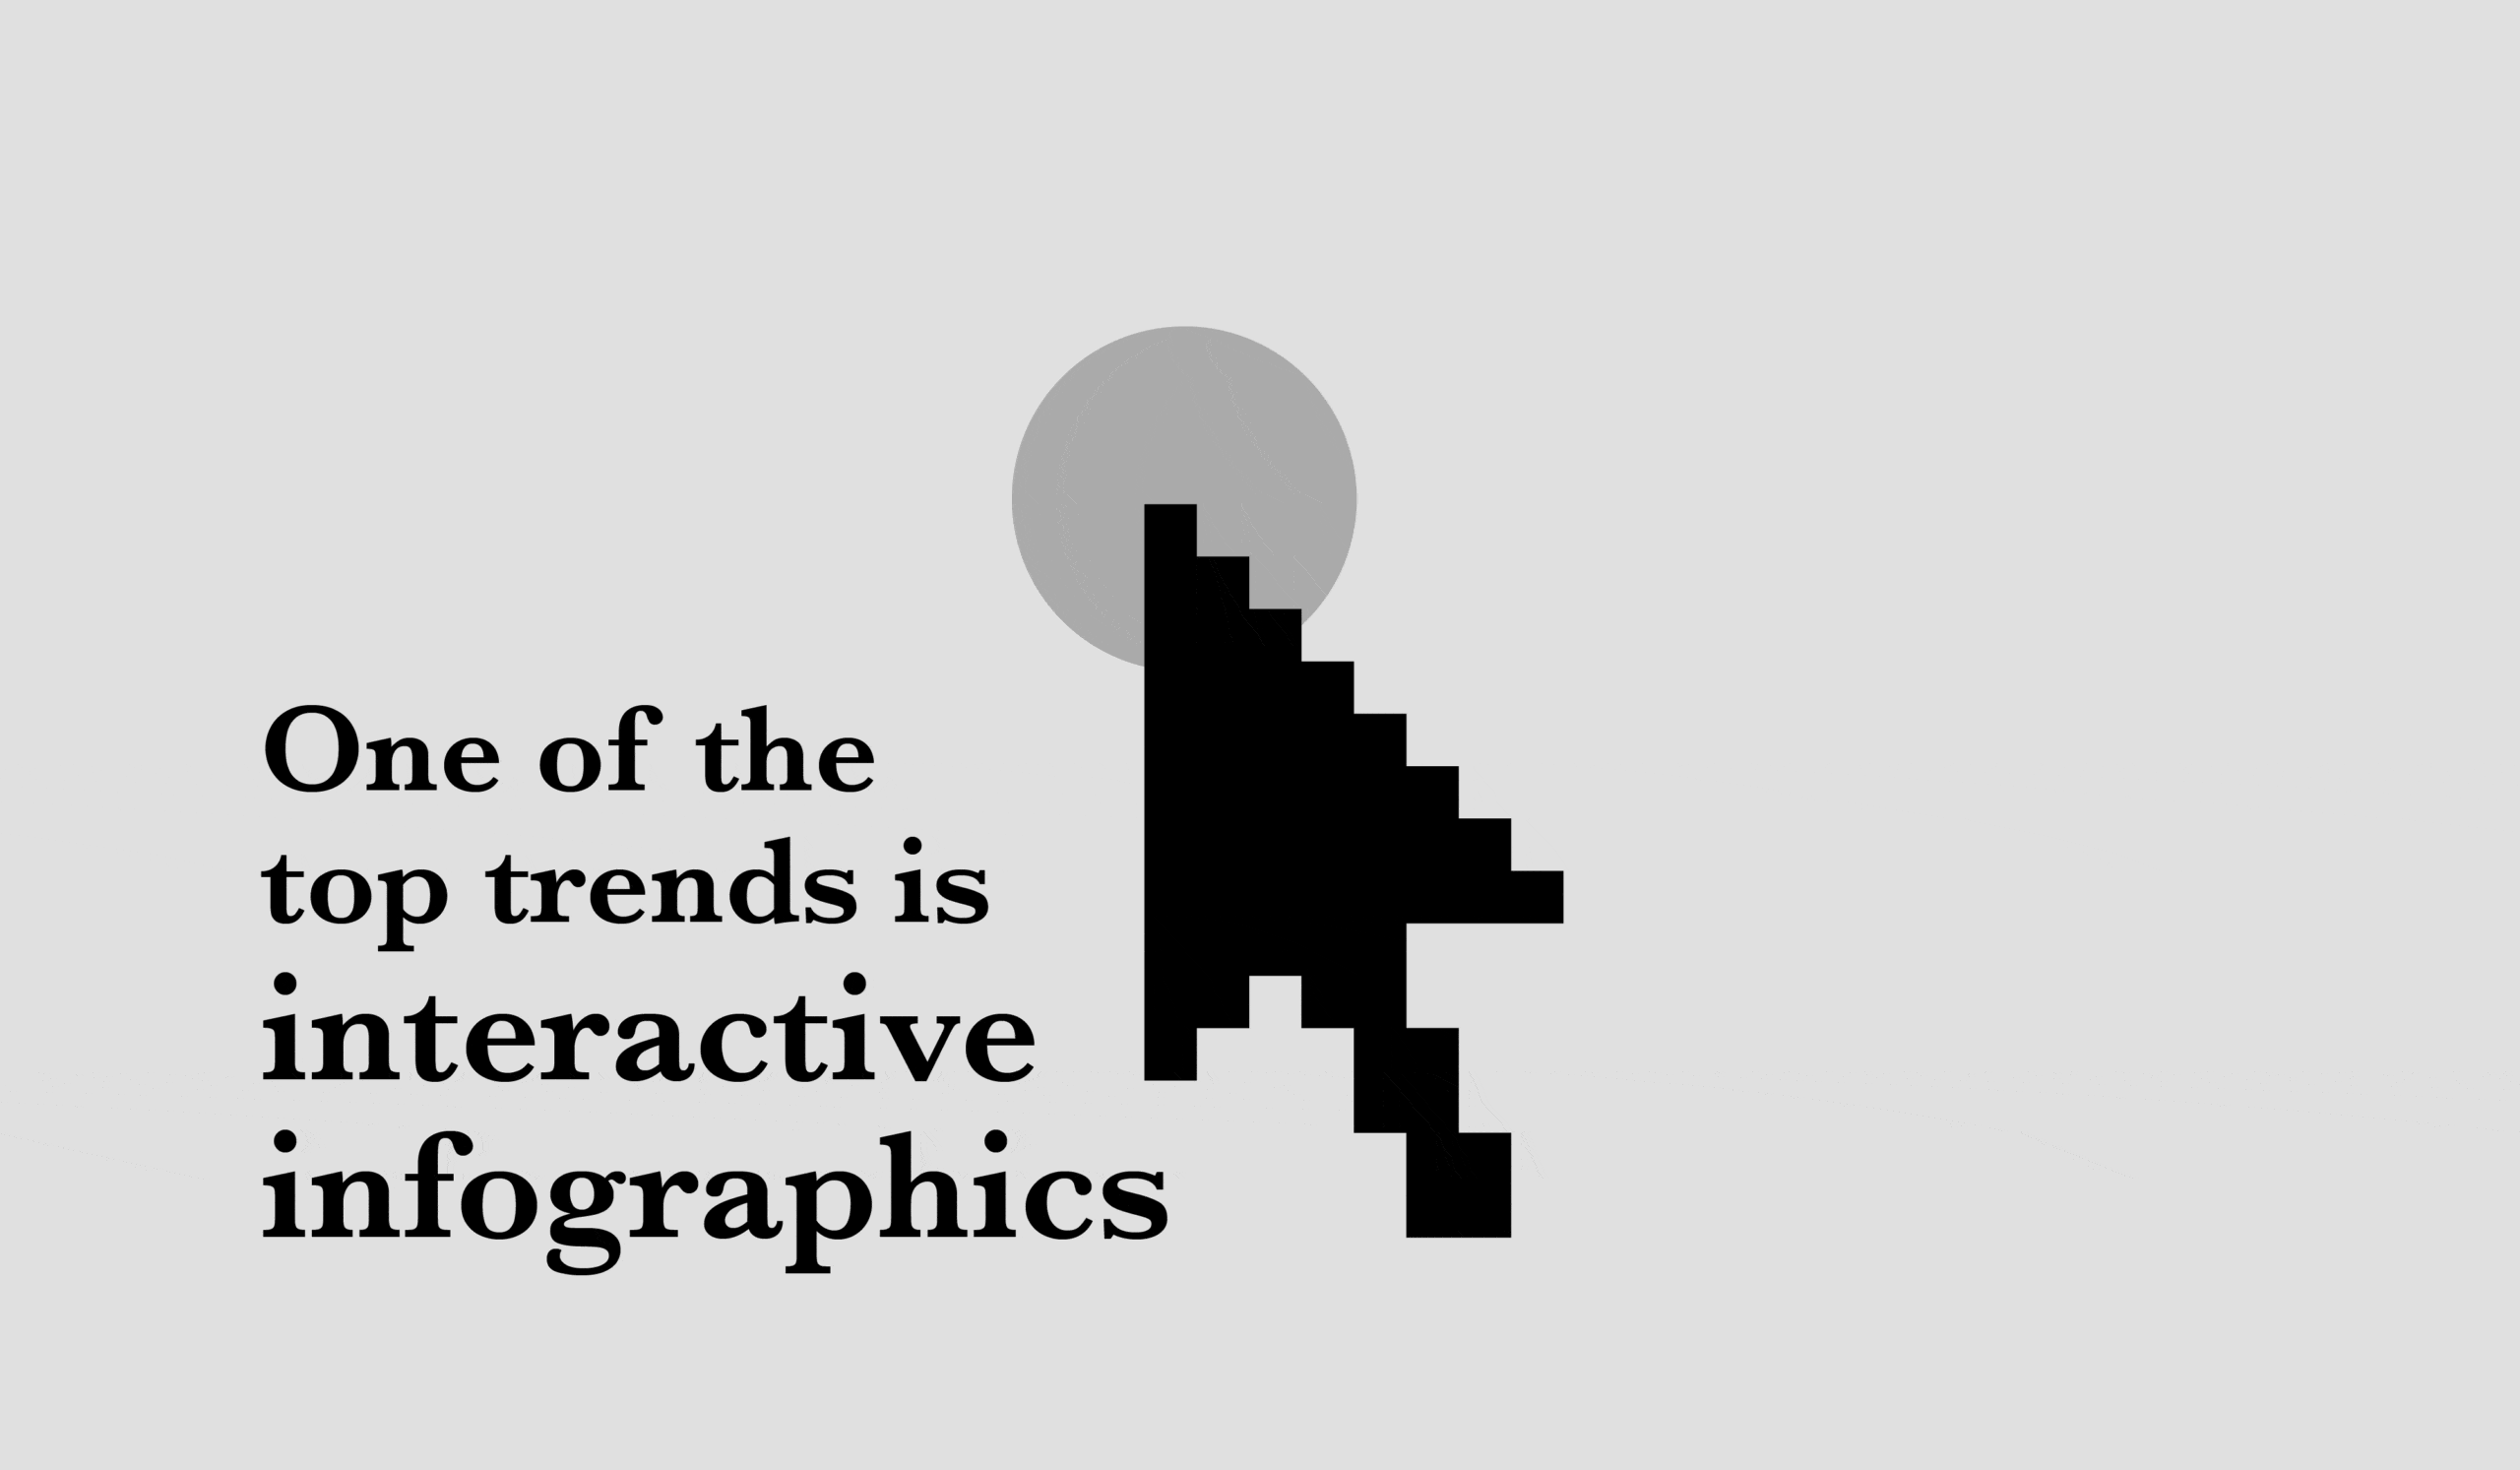 One of the top trends is interactive infographics.